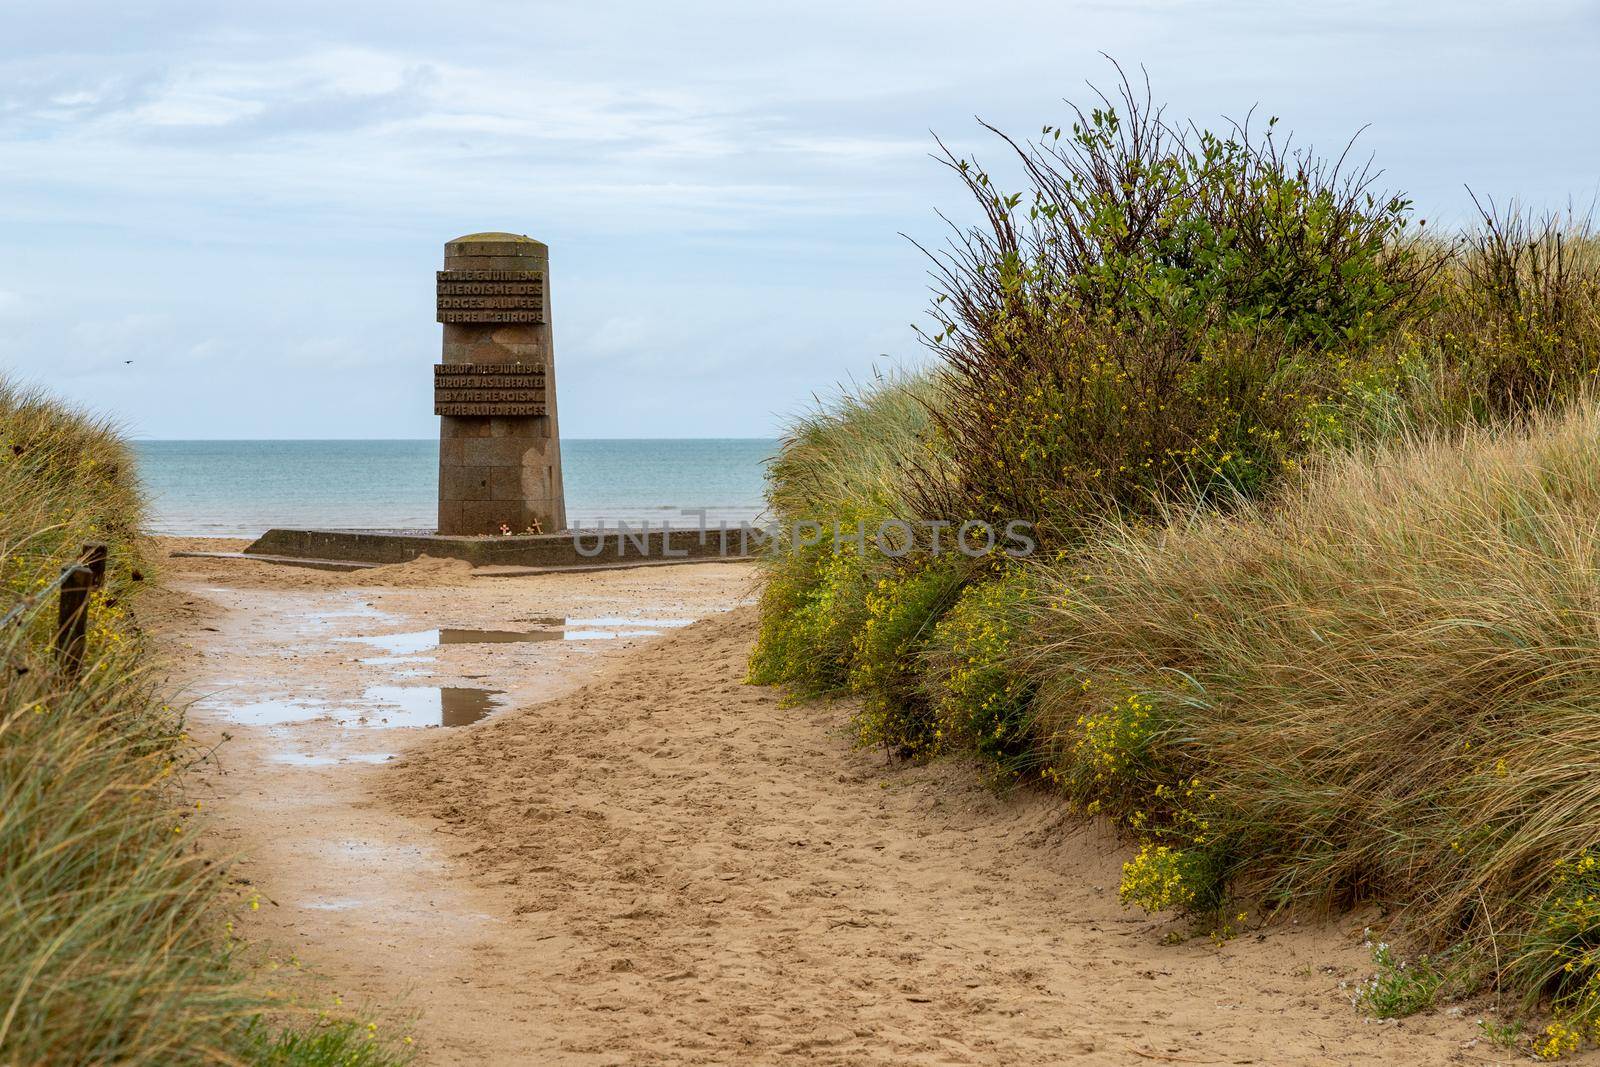 Juno Beach Normandy France 10.26.2019 the monuments in memory of D Day landings by kgboxford